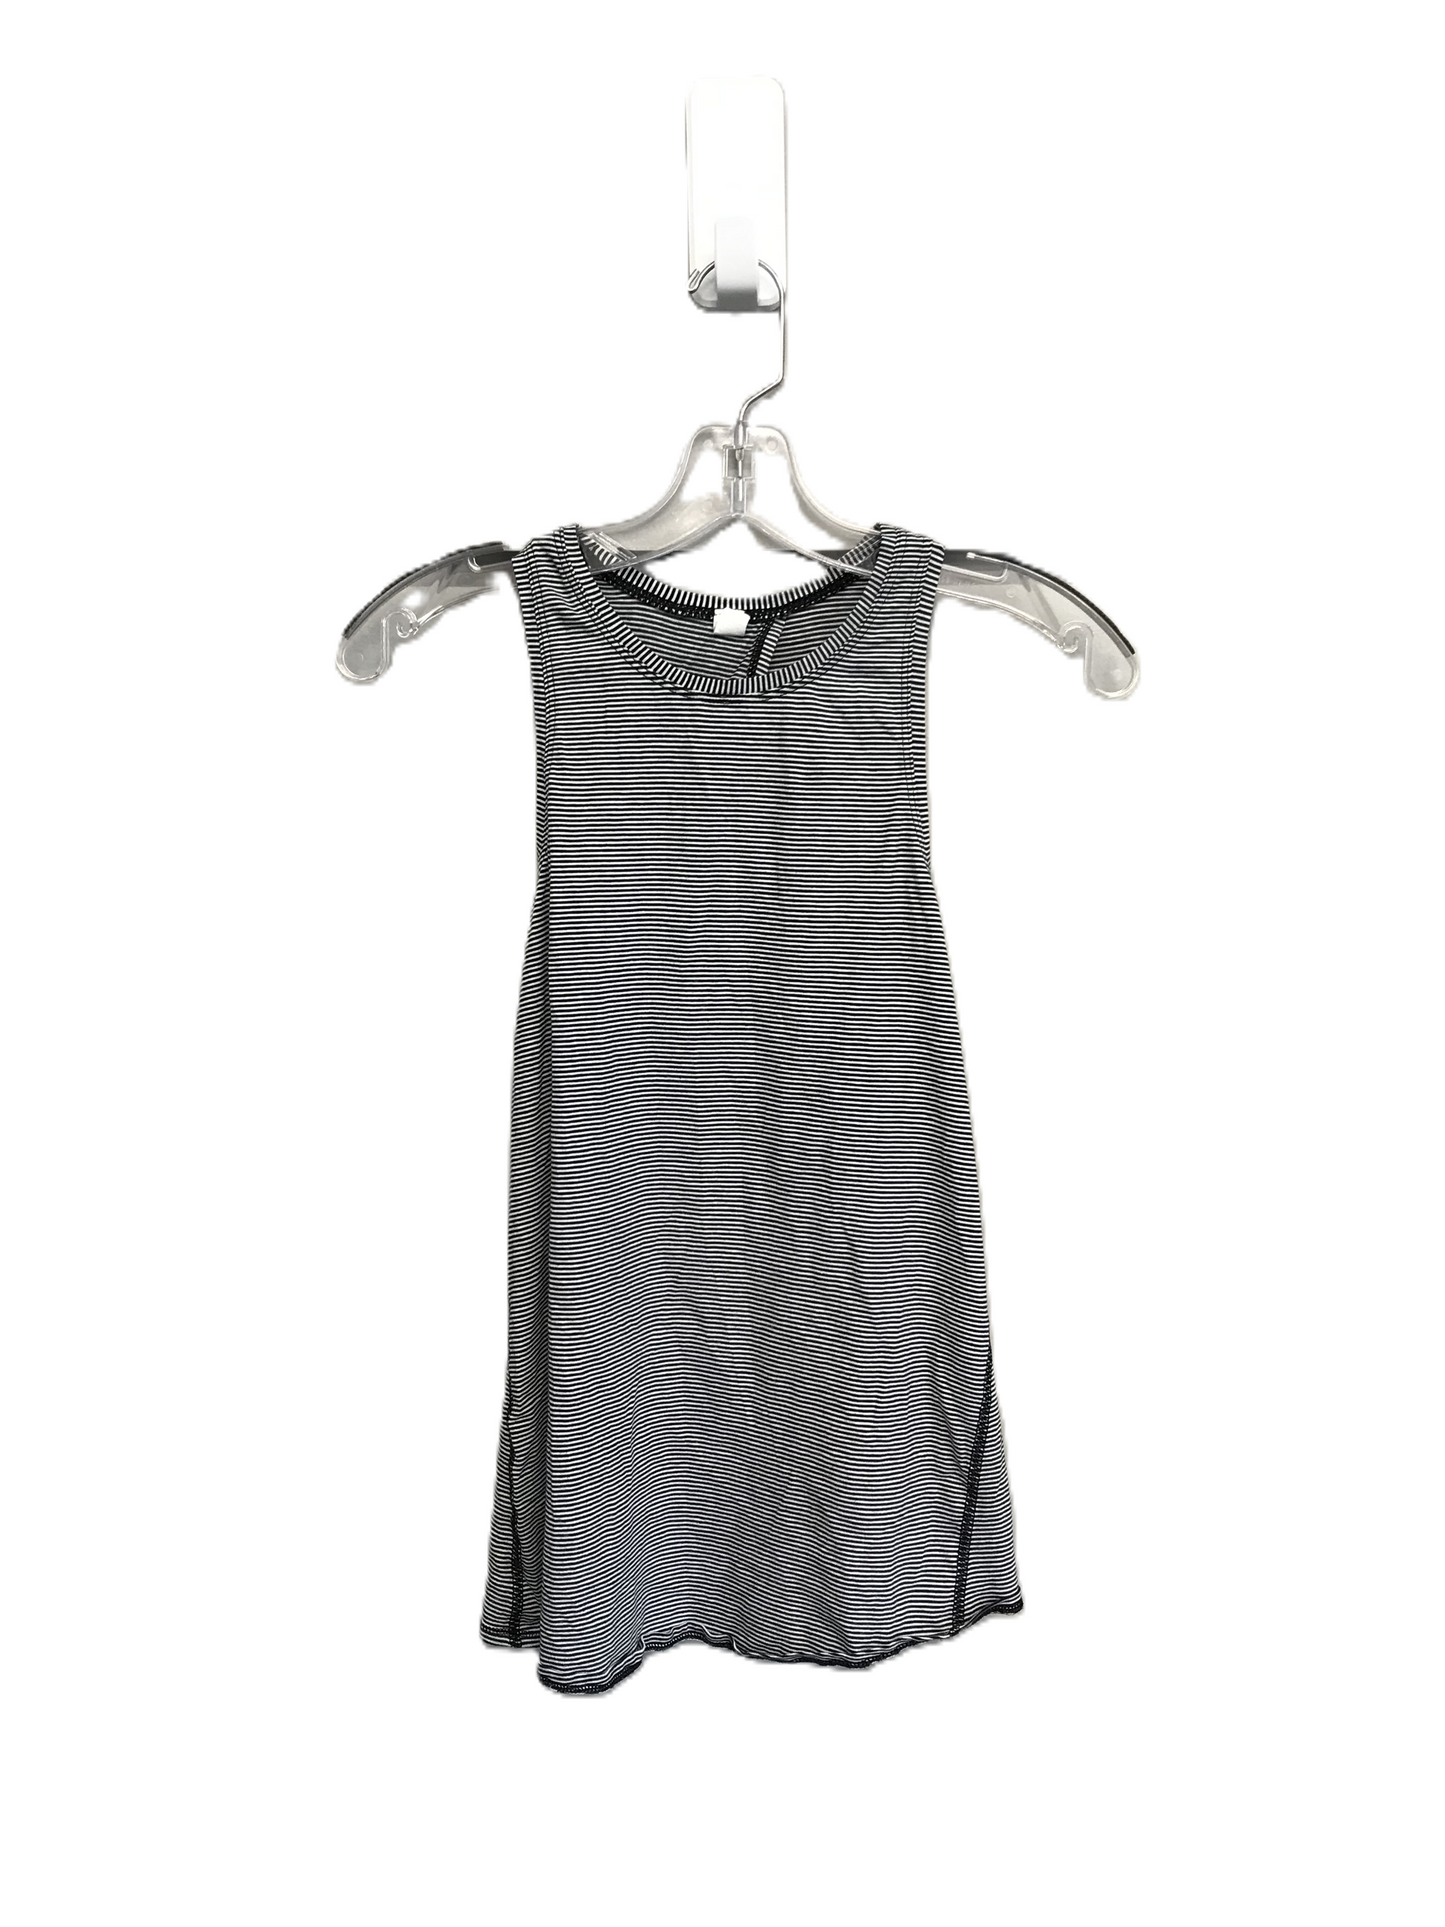 Black & White Athletic Tank Top By Lululemon, Size: Xs